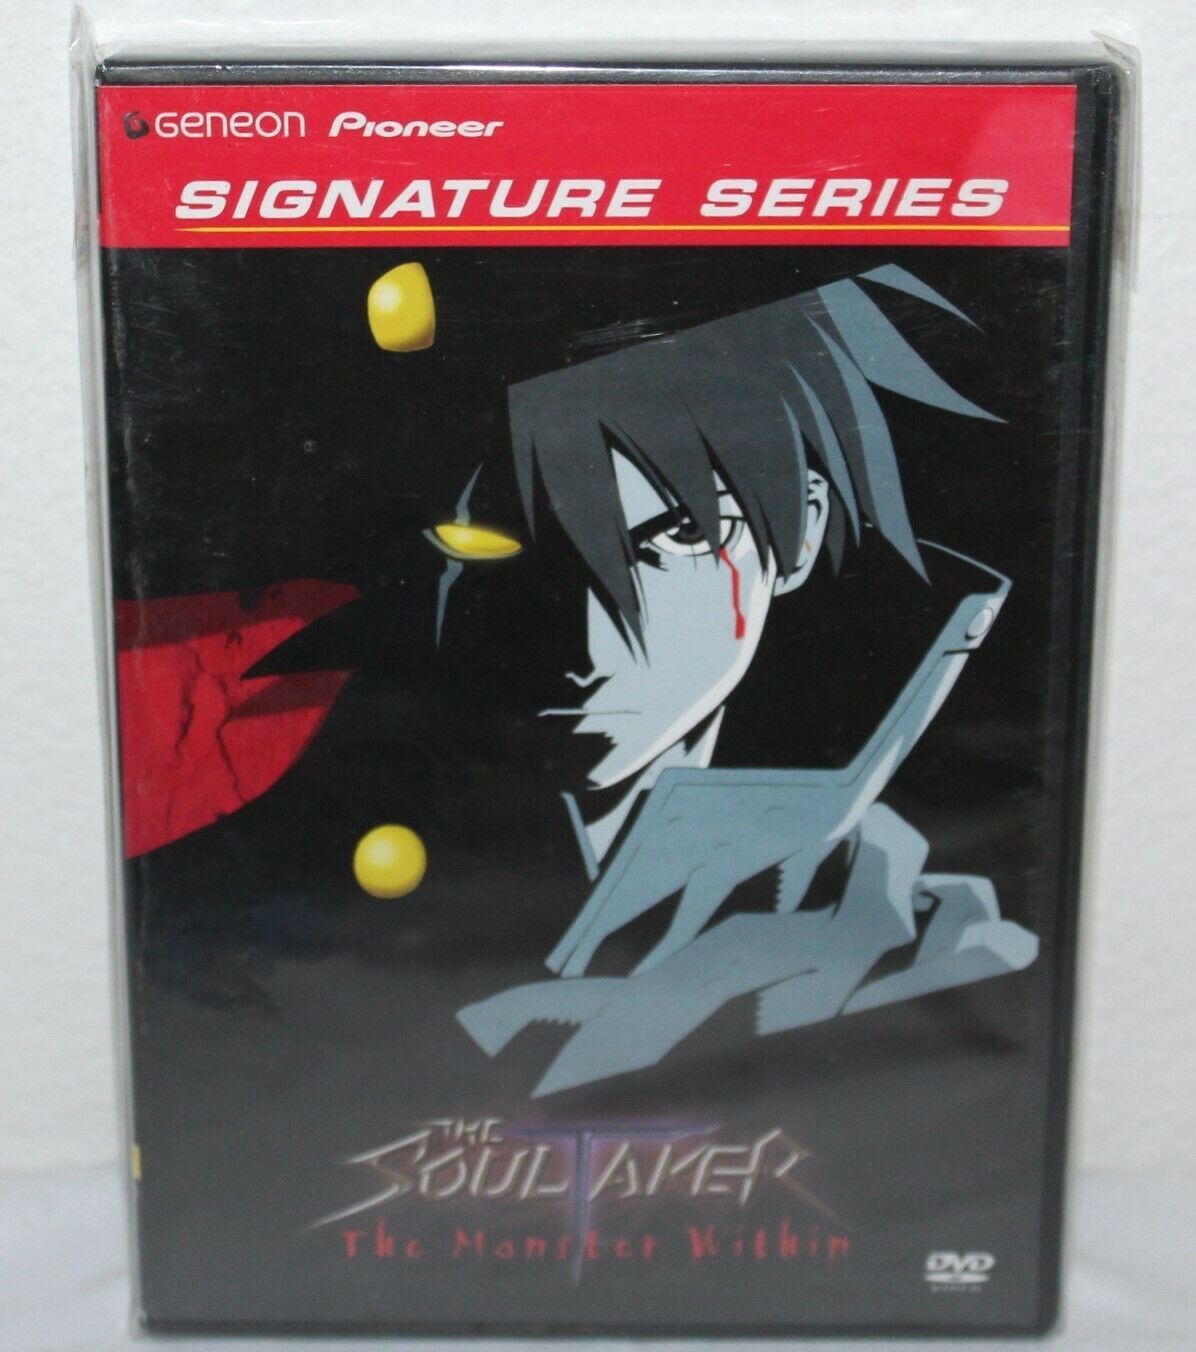 Primary image for The Soul Taker The Monster Within Brand New DVD Signature Series Geneon Pioneer